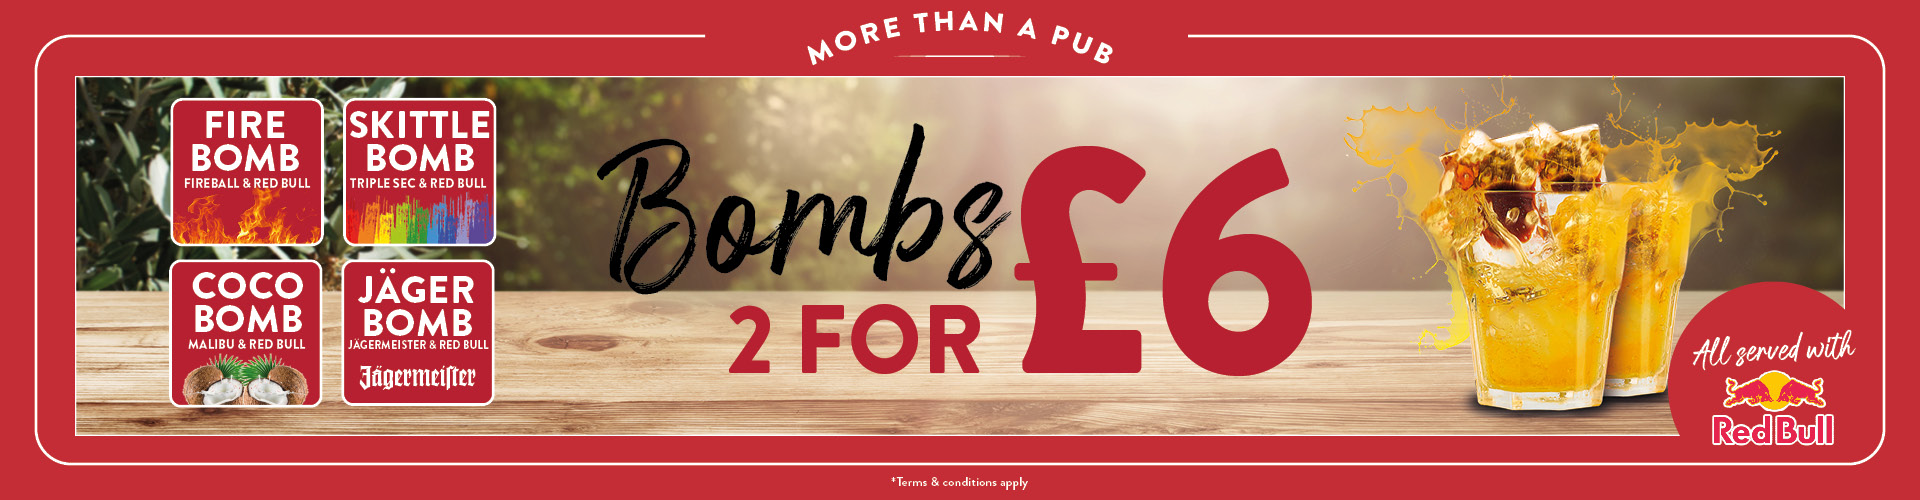 Bomb bundle drink offers at your local Craft Union Pub